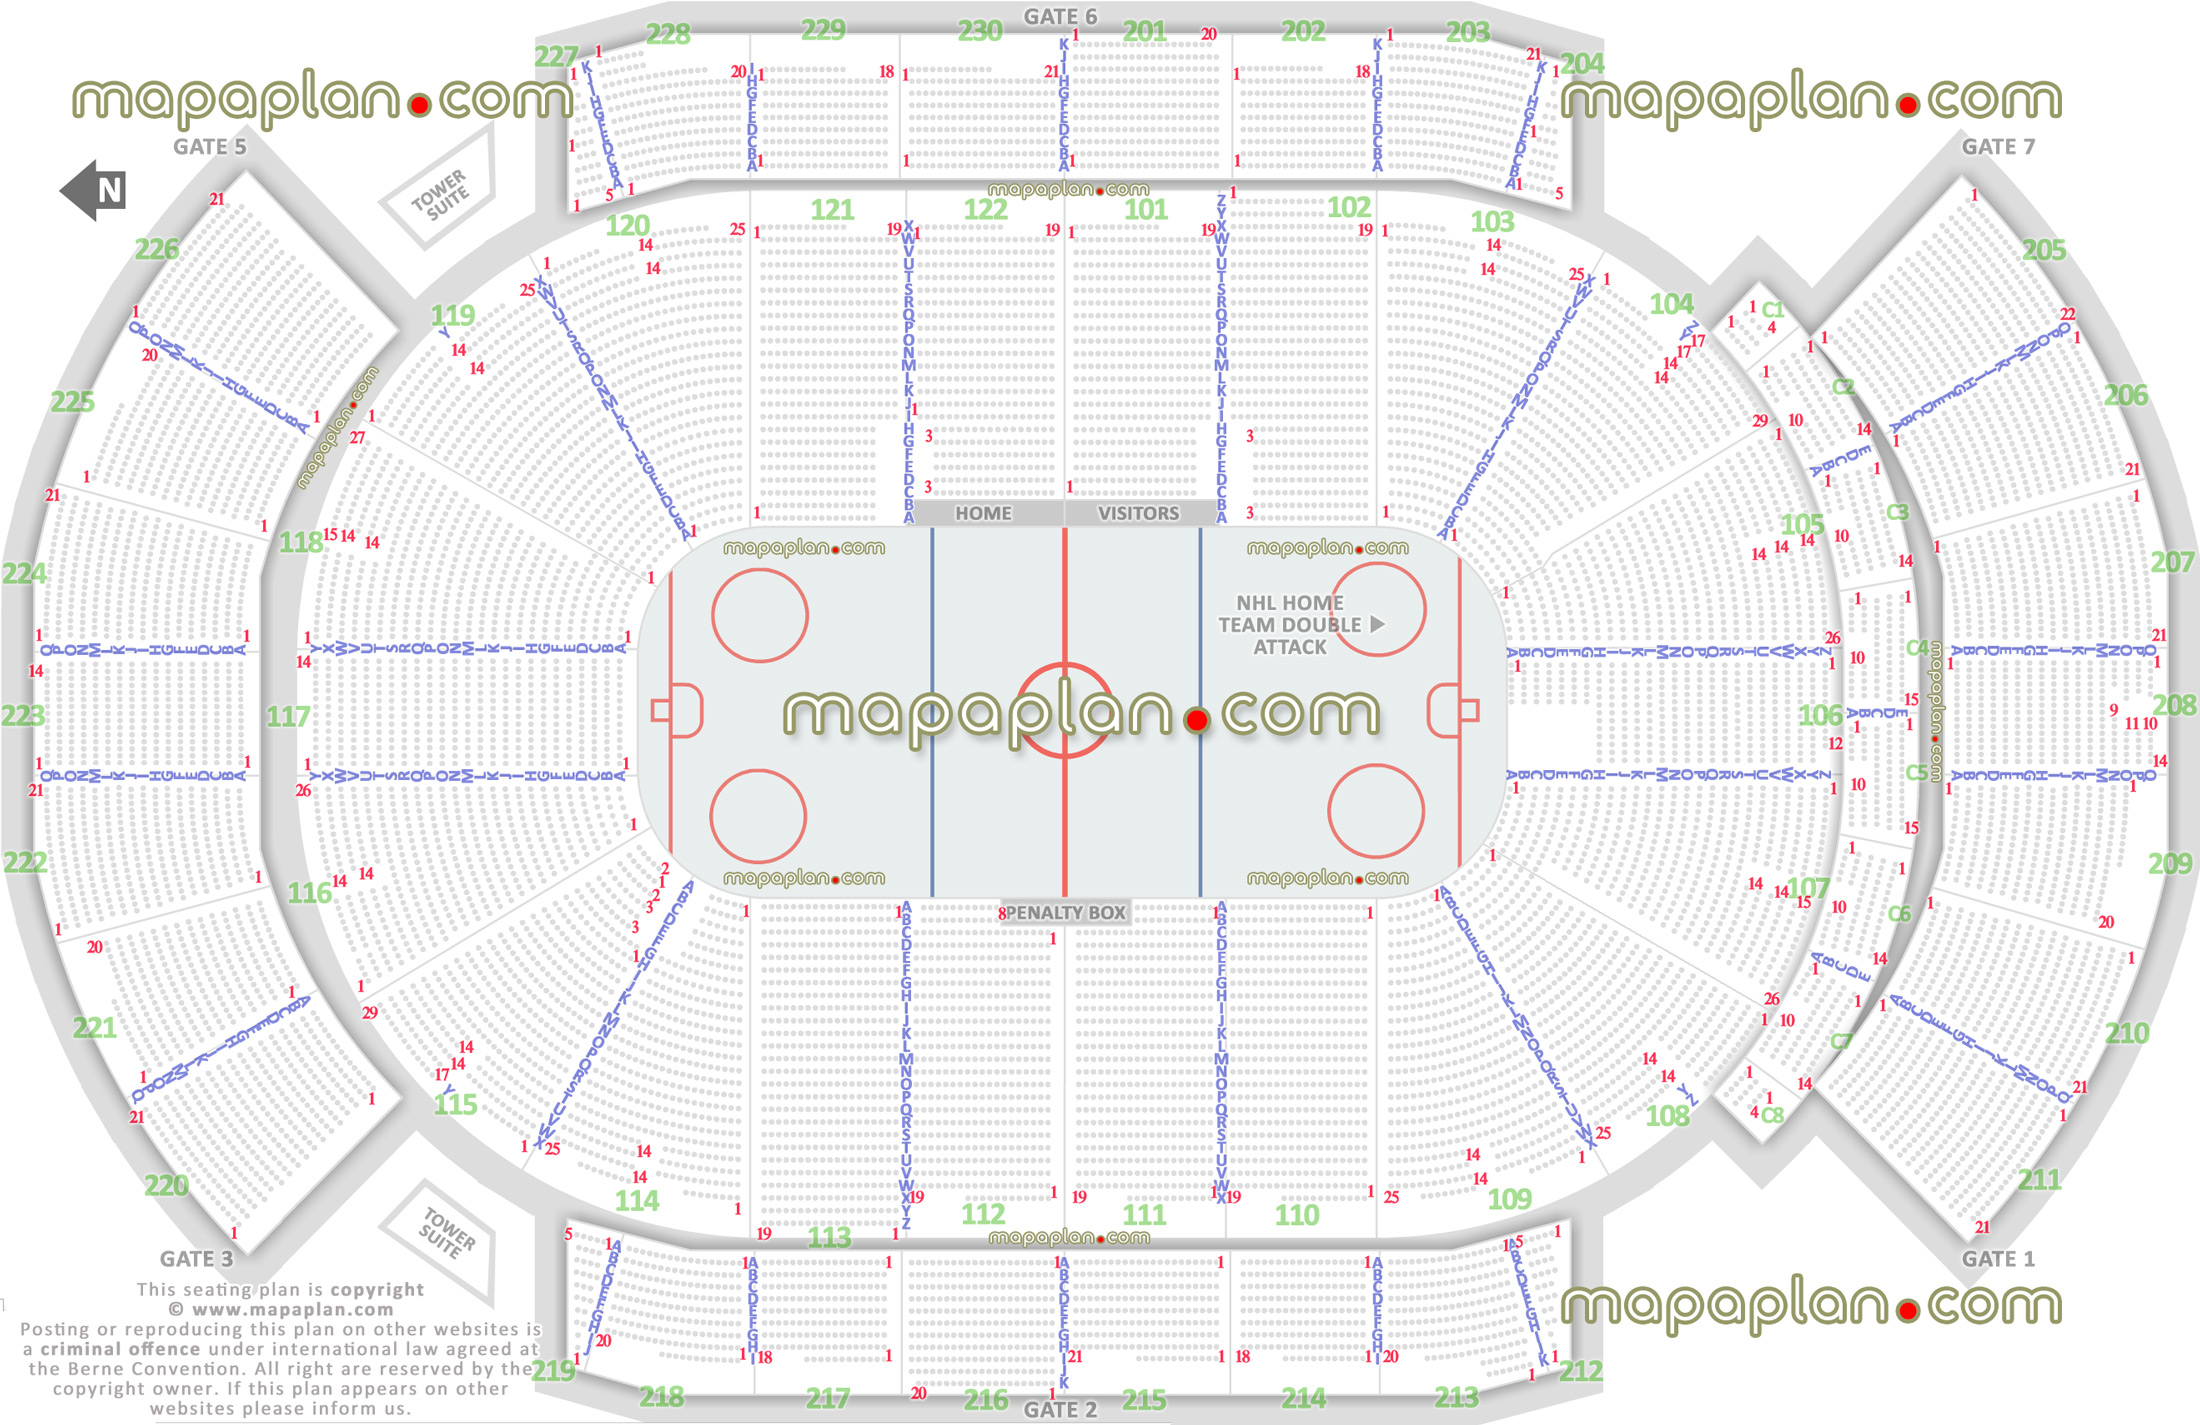 hockey plan arizona coyotes nhl games phoenix arena stadium diagram individual find seat locator seats row best seats rows numbered upper balcony club lower level sections 101 102 103 104 105 106 107 108 109 110 111 112 113 114 115 116 117 118 119 120 121 122 Glendale Gila River Arena seating chart